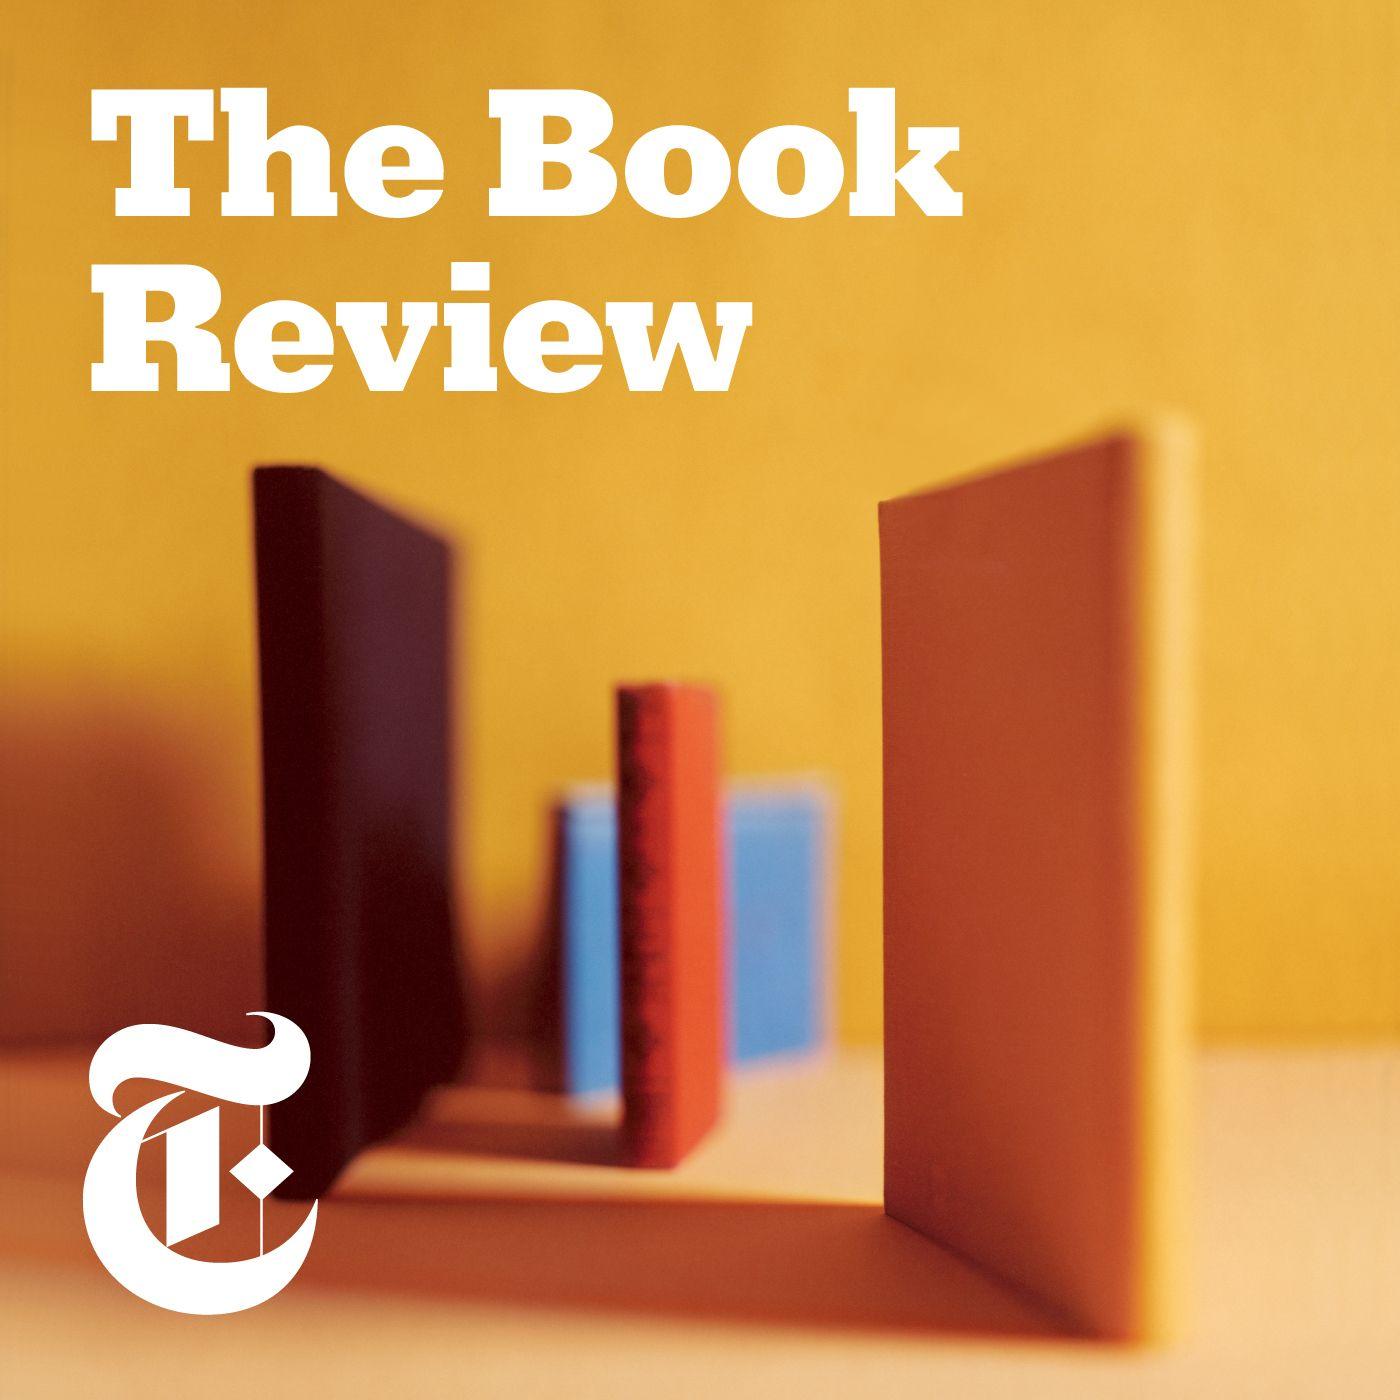 The Book Review from NYT